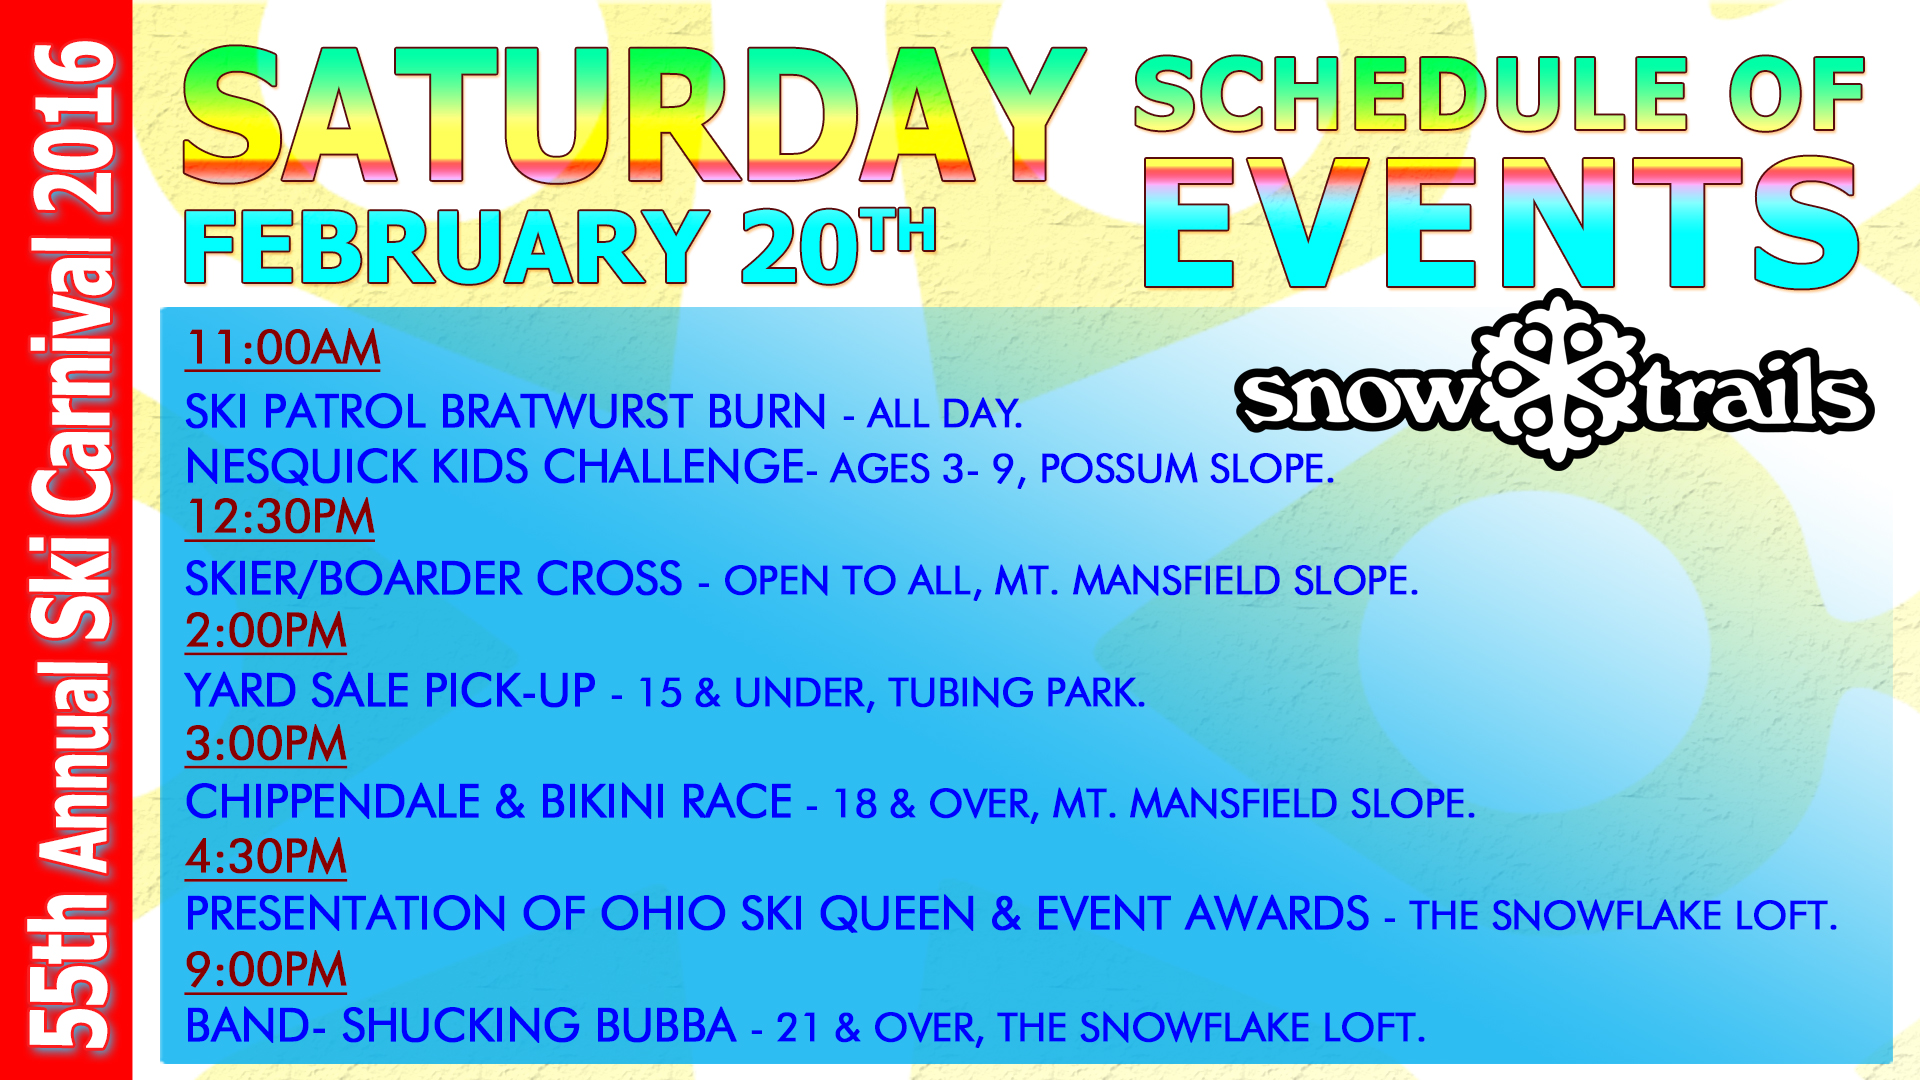 55th Carnival Saturday, February 20th Schedule of Events